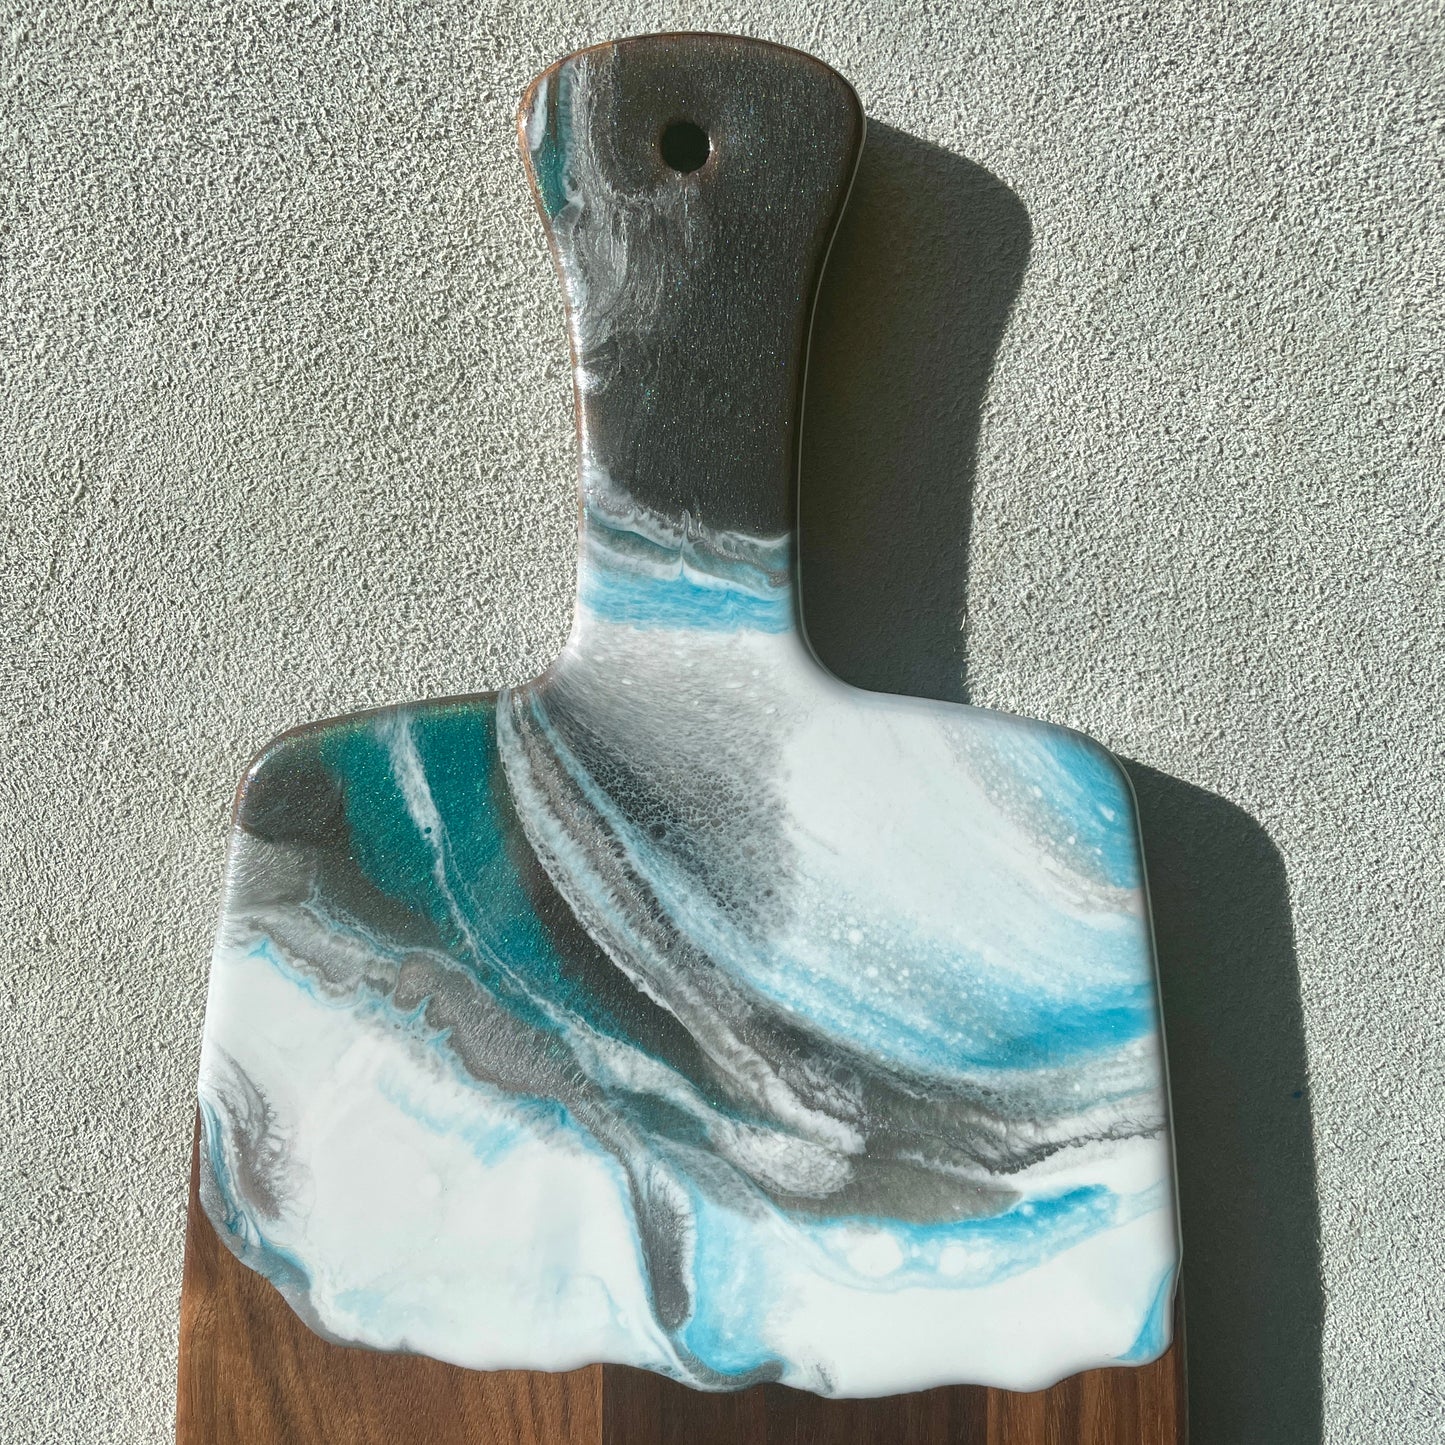 Artisan Walnut Cutting Board with Teal and Gray Resin Art Handle